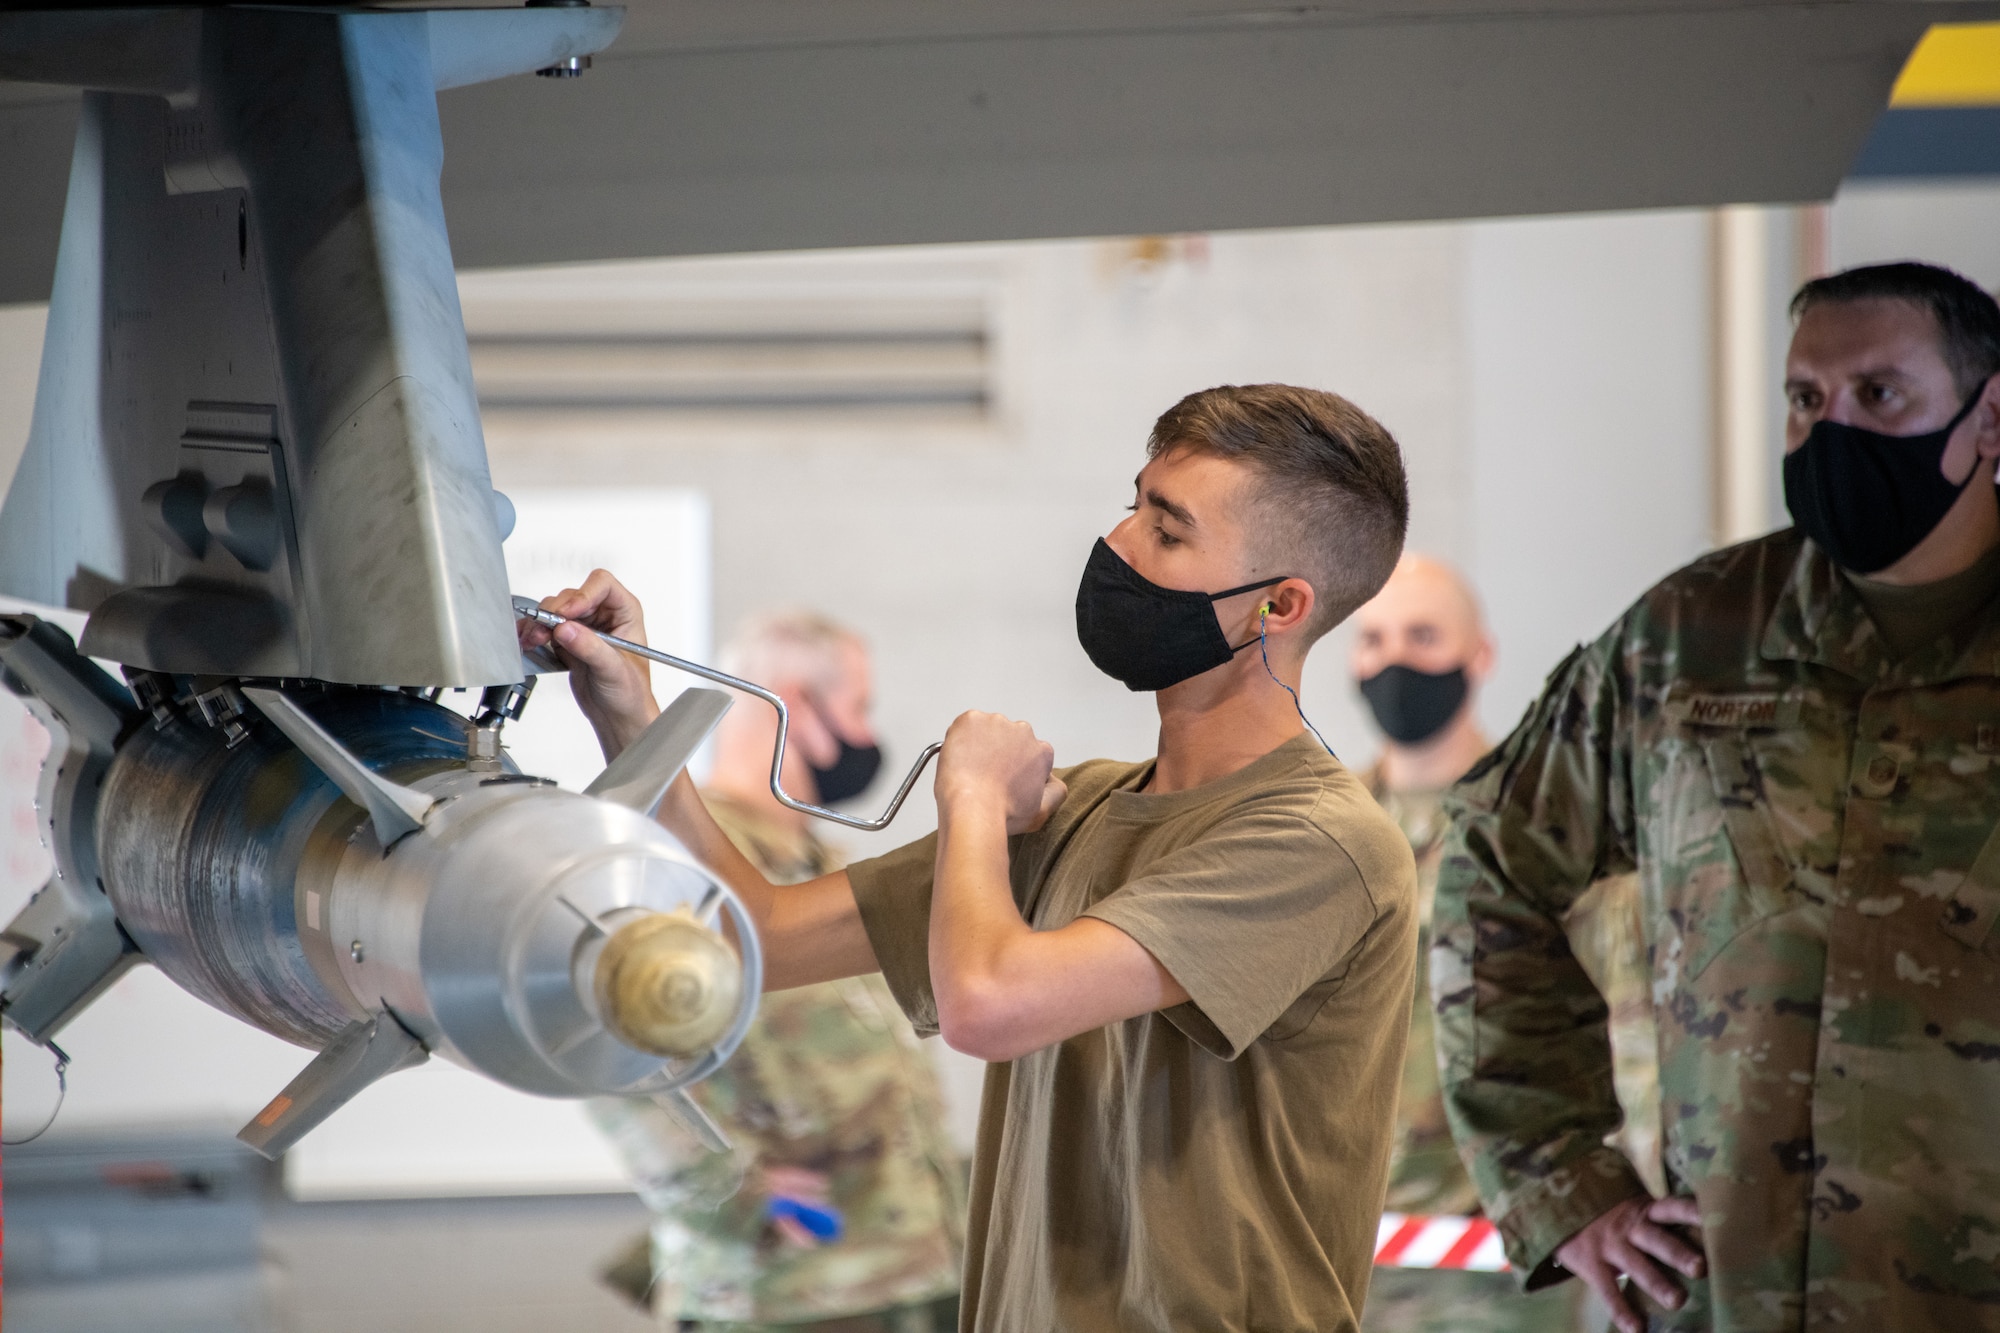 U.S. Air Force Staff Sgt. Connor Hansen from the 419th Aircraft Maintenance Squadron secures an unarmed bomb to an F-35A Lightning II aircraft during a weapons load competition at Hill Air Force Base, Utah on Sept. 24, 2021. The quarterly competition focuses on speed, accuracy, and safety, ensuring standard loading procedures and proficiency across the wings. (U.S. Air Force photo by Senior Airman Erica Webster)